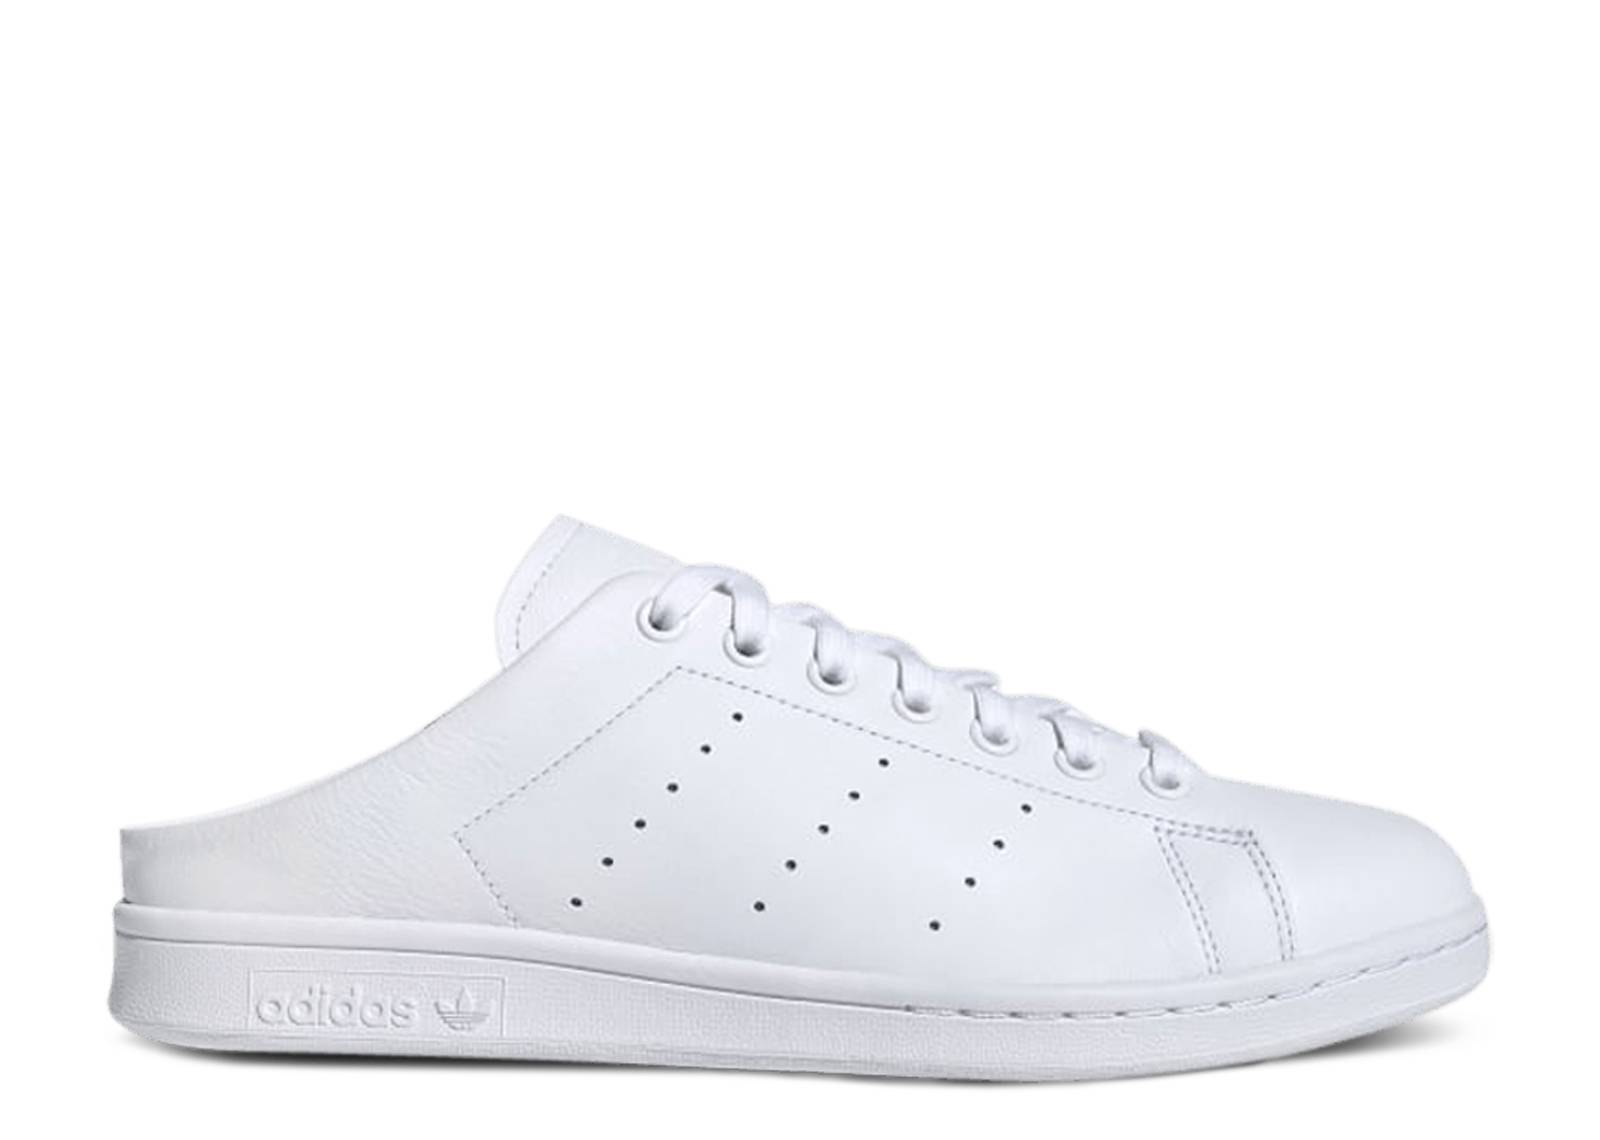 Stan Smith Slip-On Backless Mule 'Cloud White'